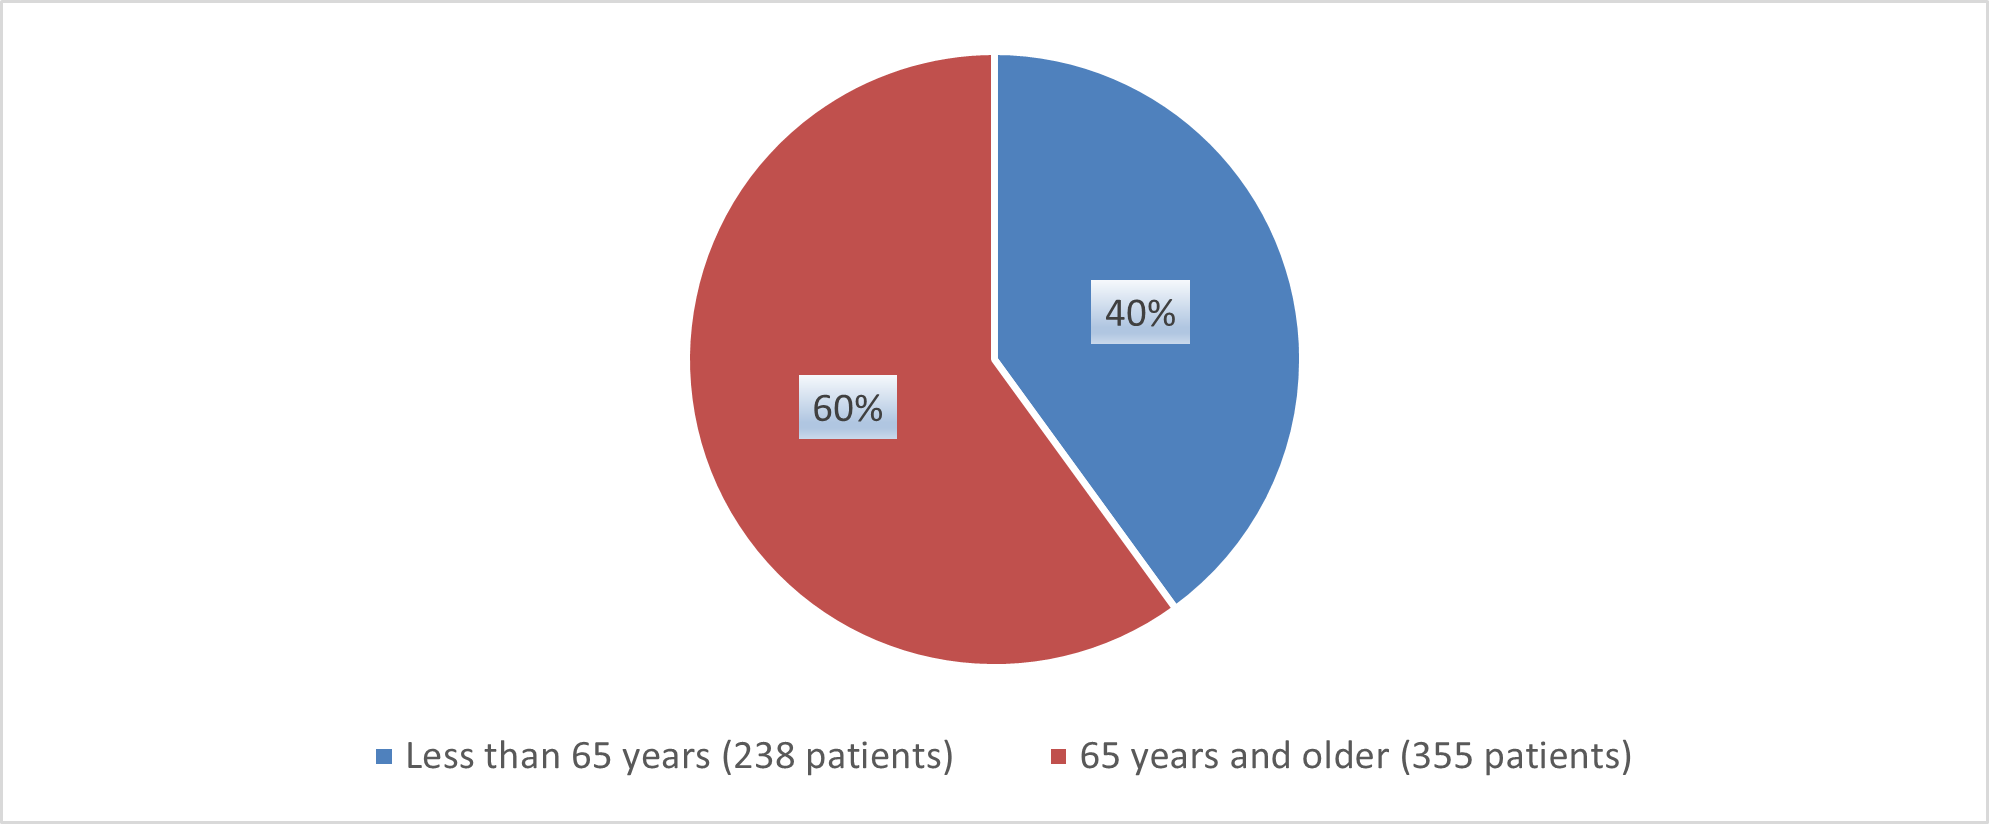 Pie chart summarizing how many patients by age were in the clinical trial. In total, 238 (40%) patients below the age of 65 years of age and 355 (60%) patients above the age of 65 years of age participated in the clinical trial.